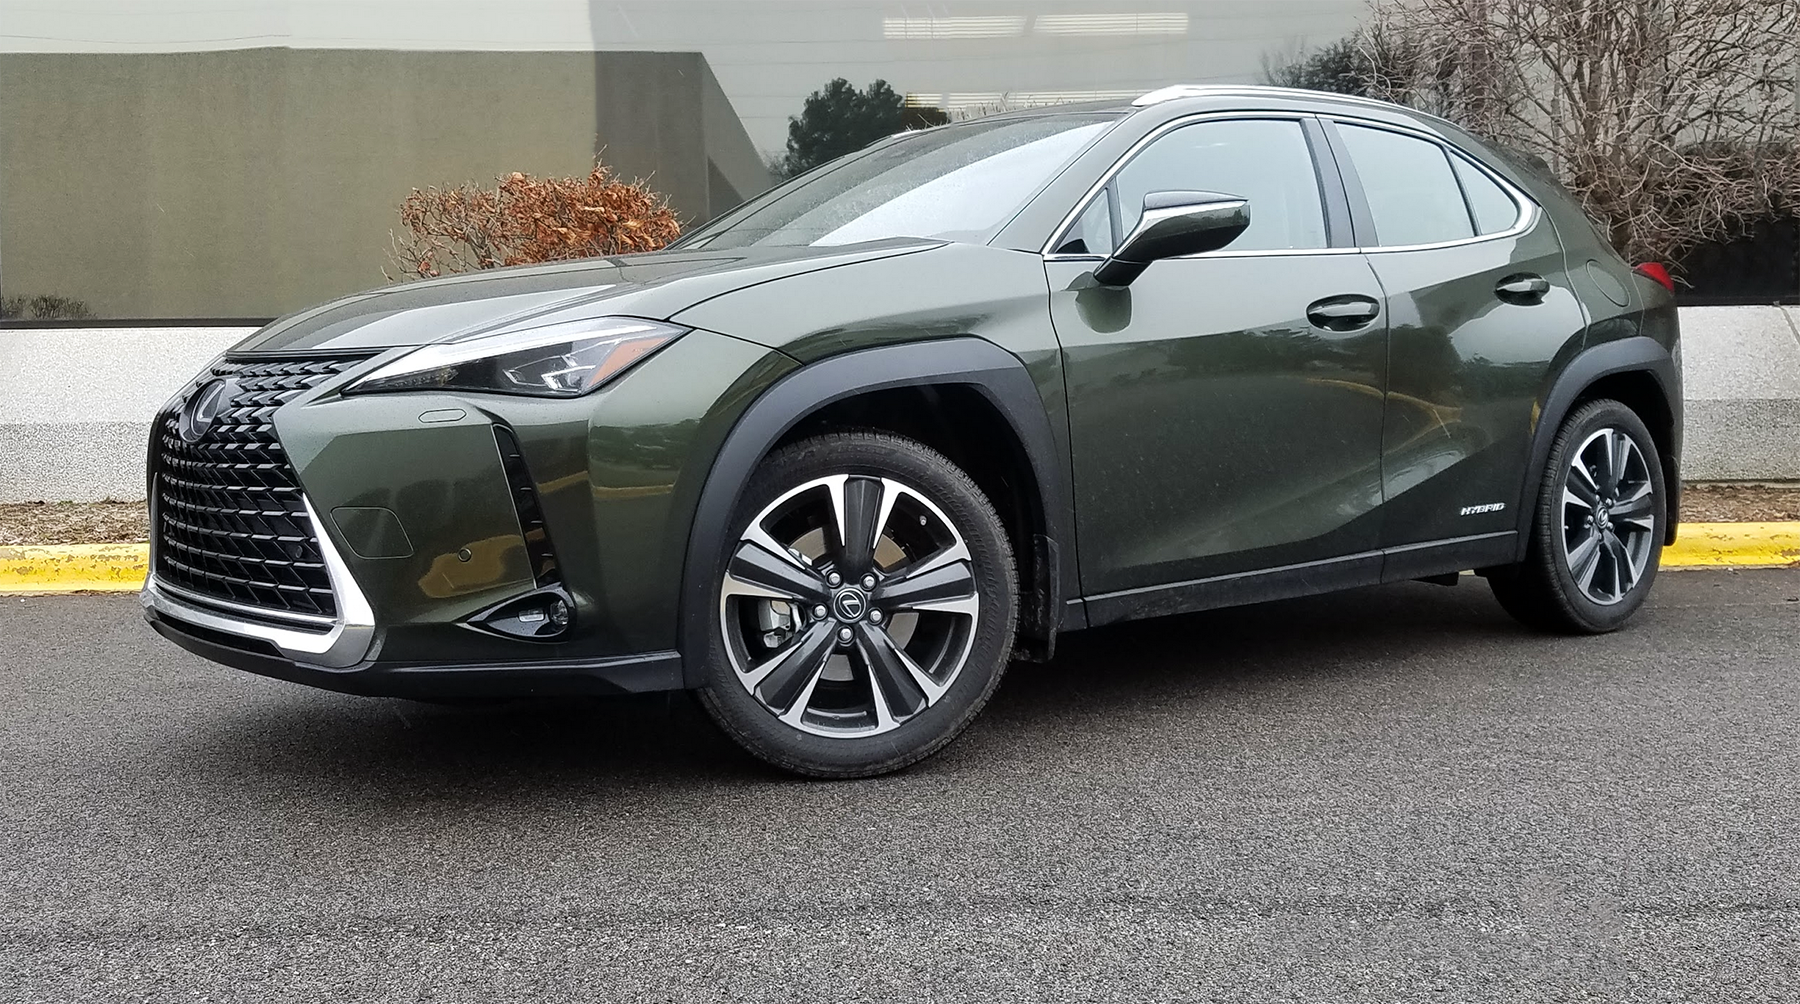 Test Drive: 2020 Lexus UX 250h Luxury | The Daily Drive | Consumer Guide®  The Daily Drive | Consumer Guide®